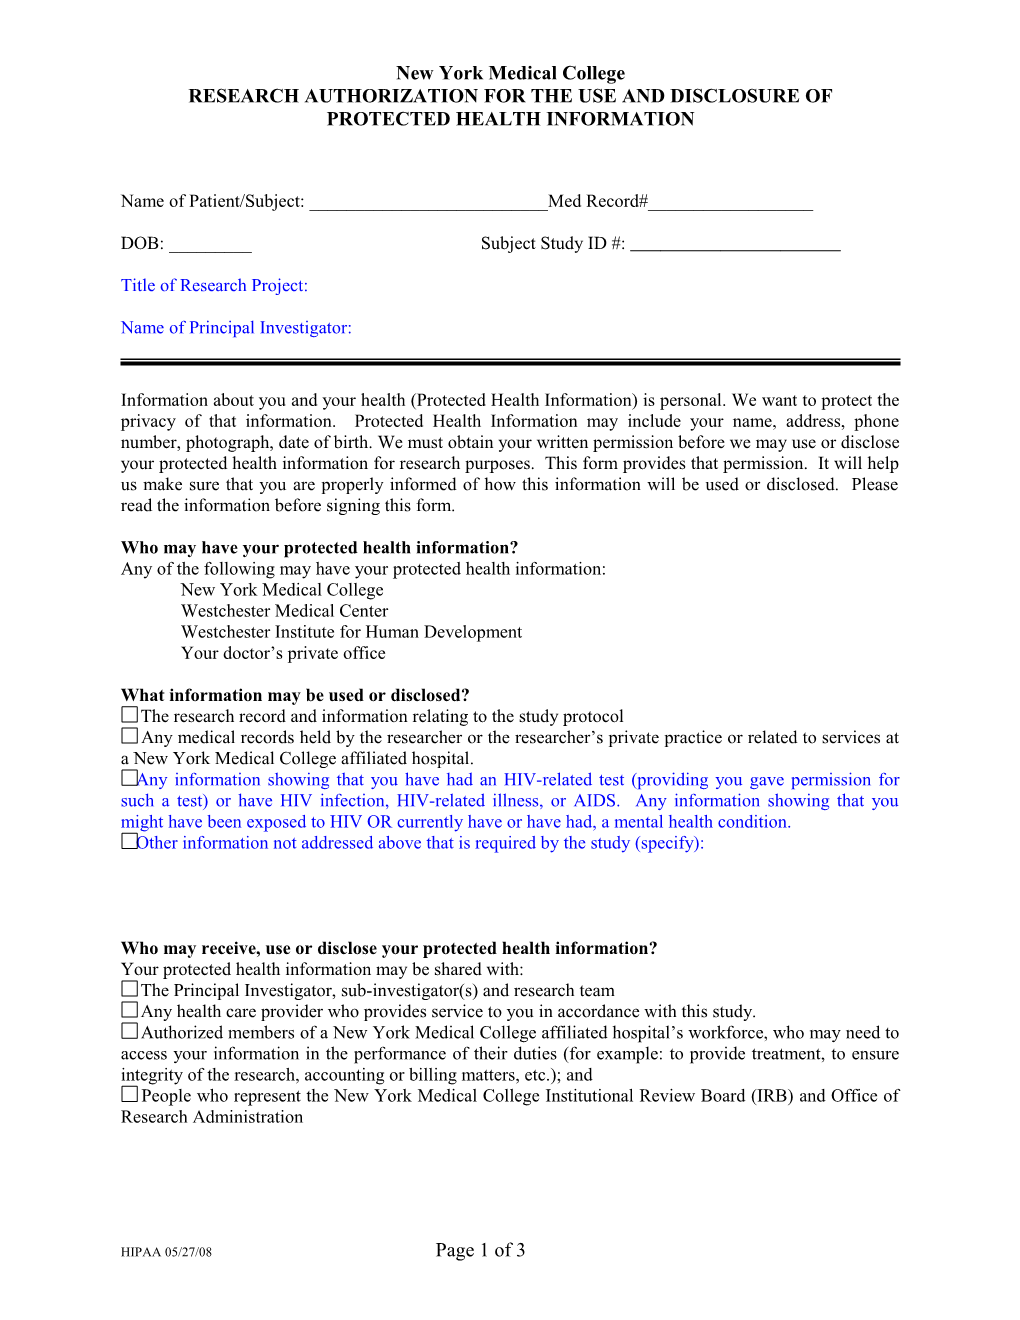 Research Authorization Form for the Use and Disclosure of Protected Health Information